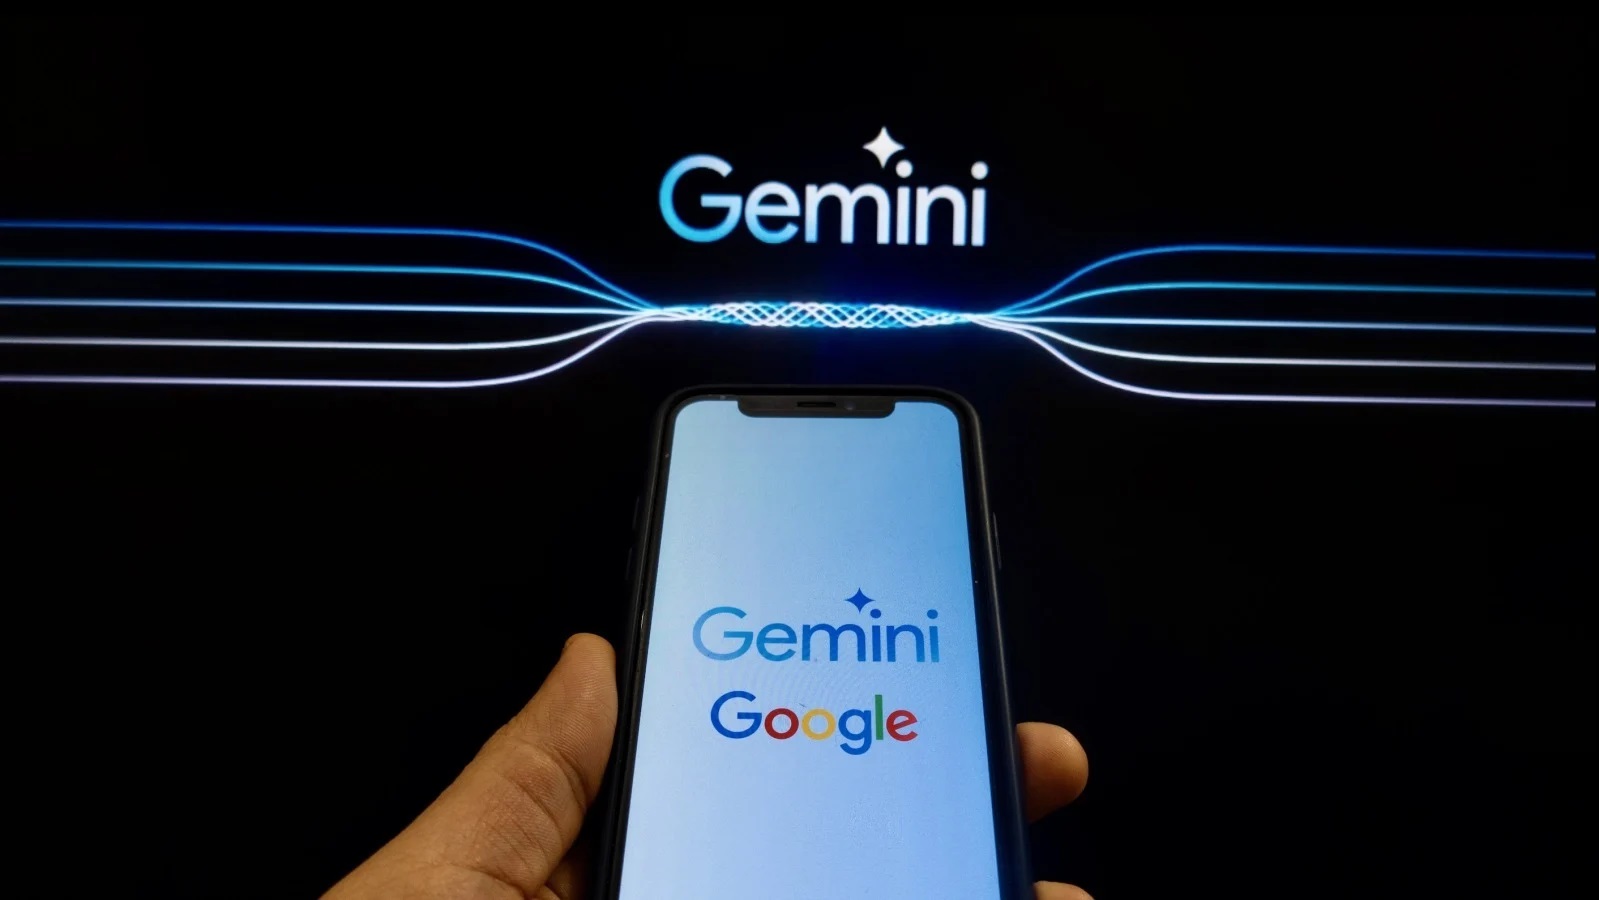 Gemini On Android Fails To Recognize Songs, Frustrating Users